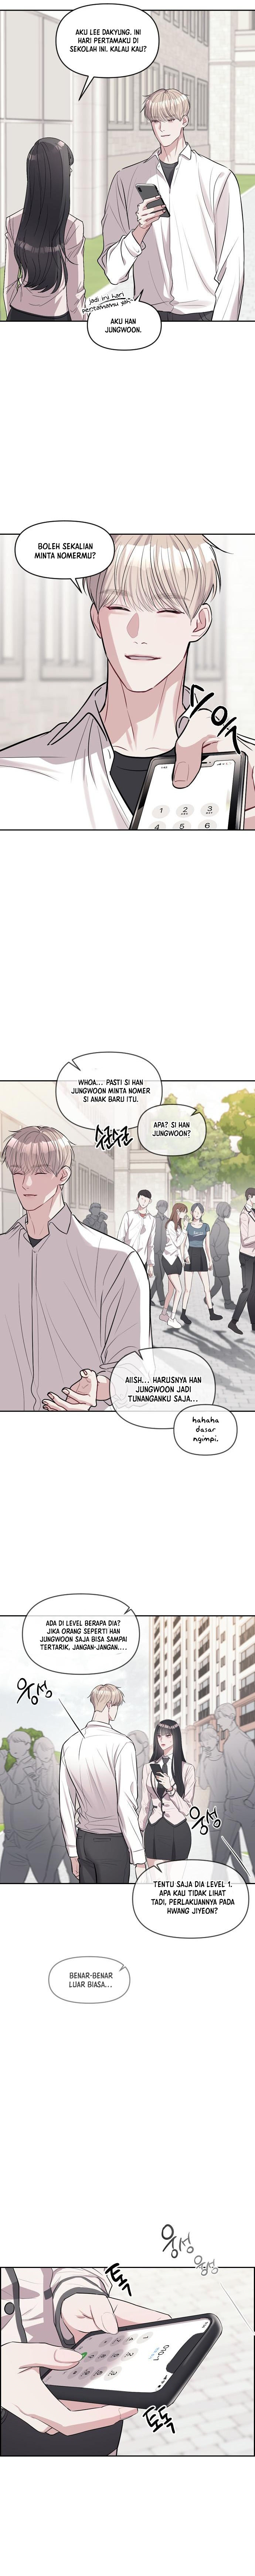 Undercover! Chaebol High School Chapter 02